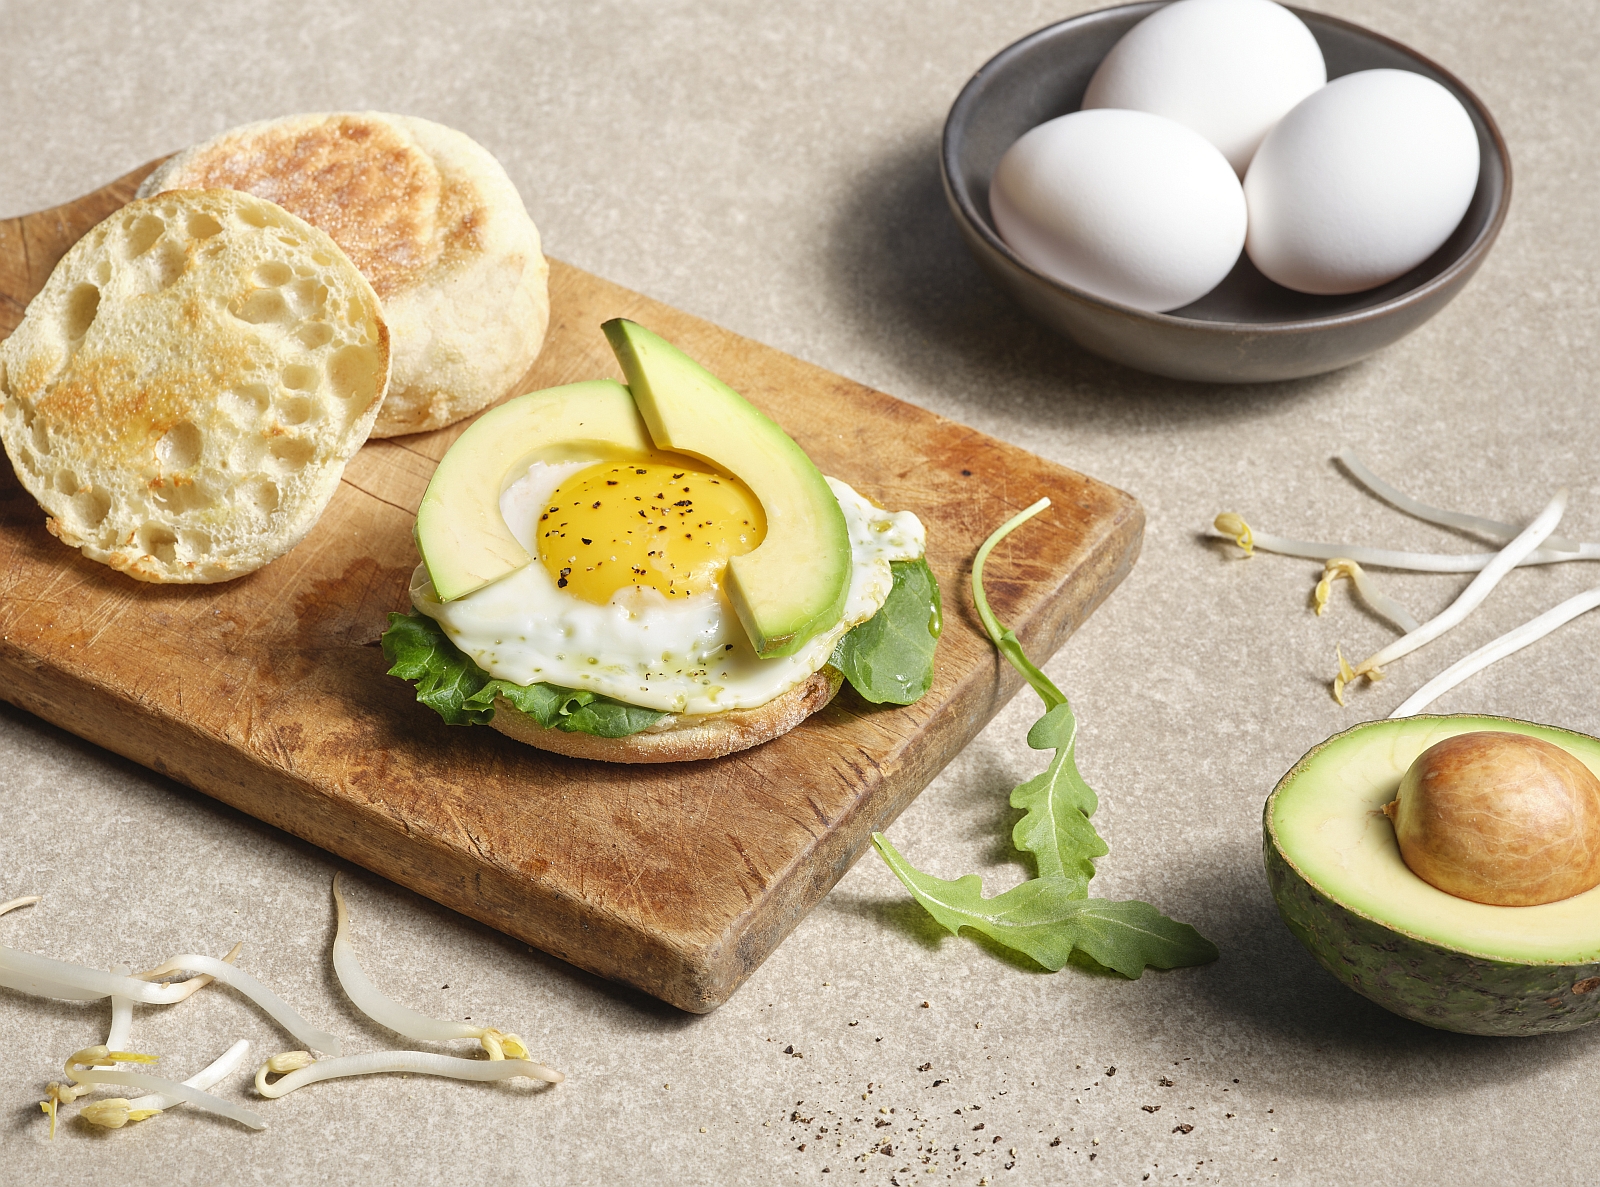 egg with avocado slices and english muffin